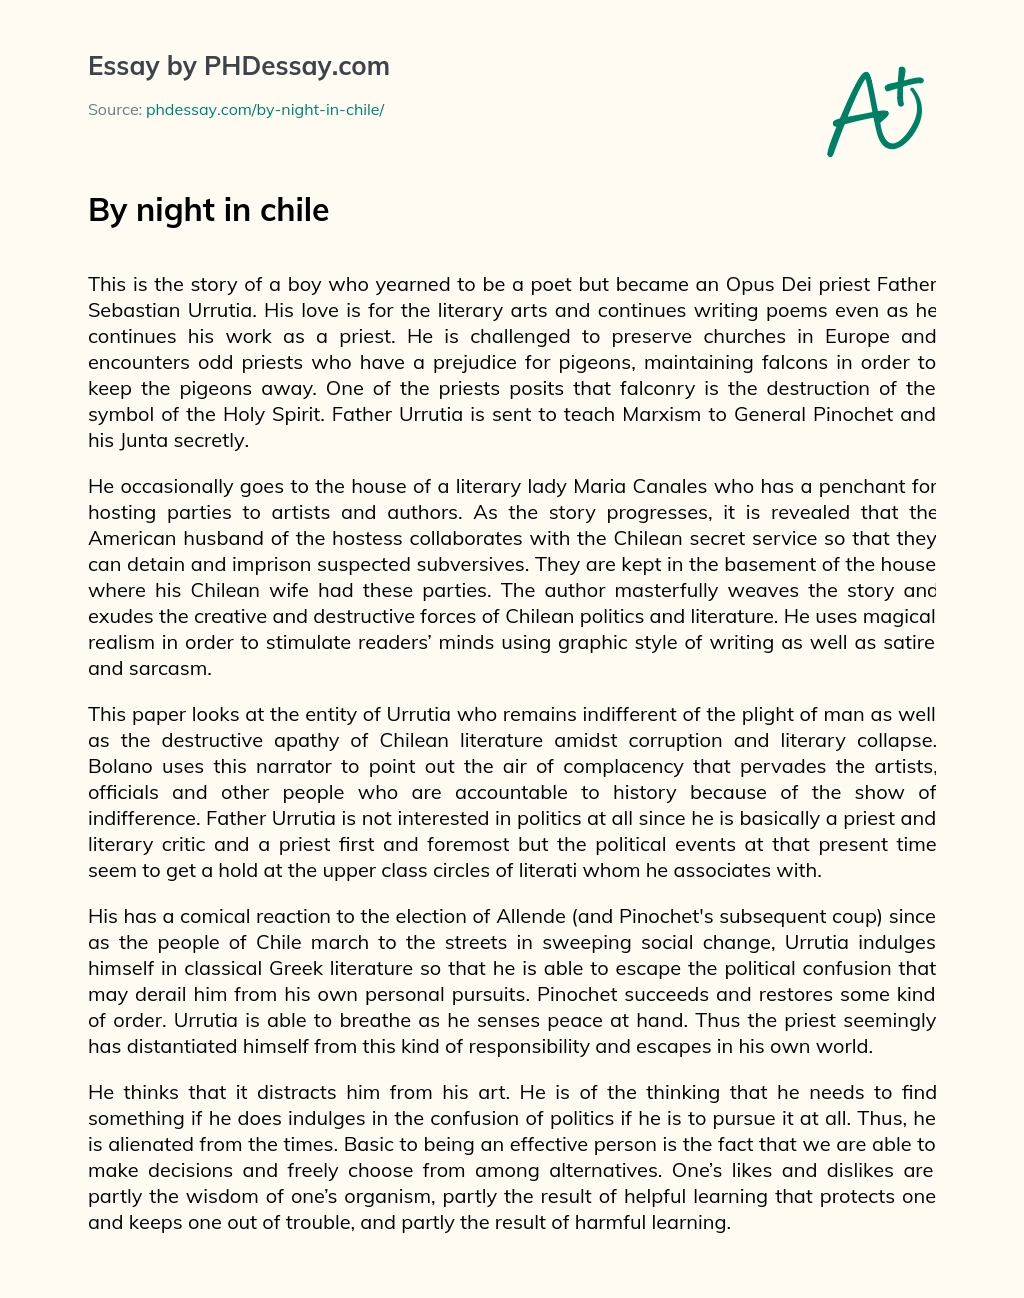 By night in chile essay